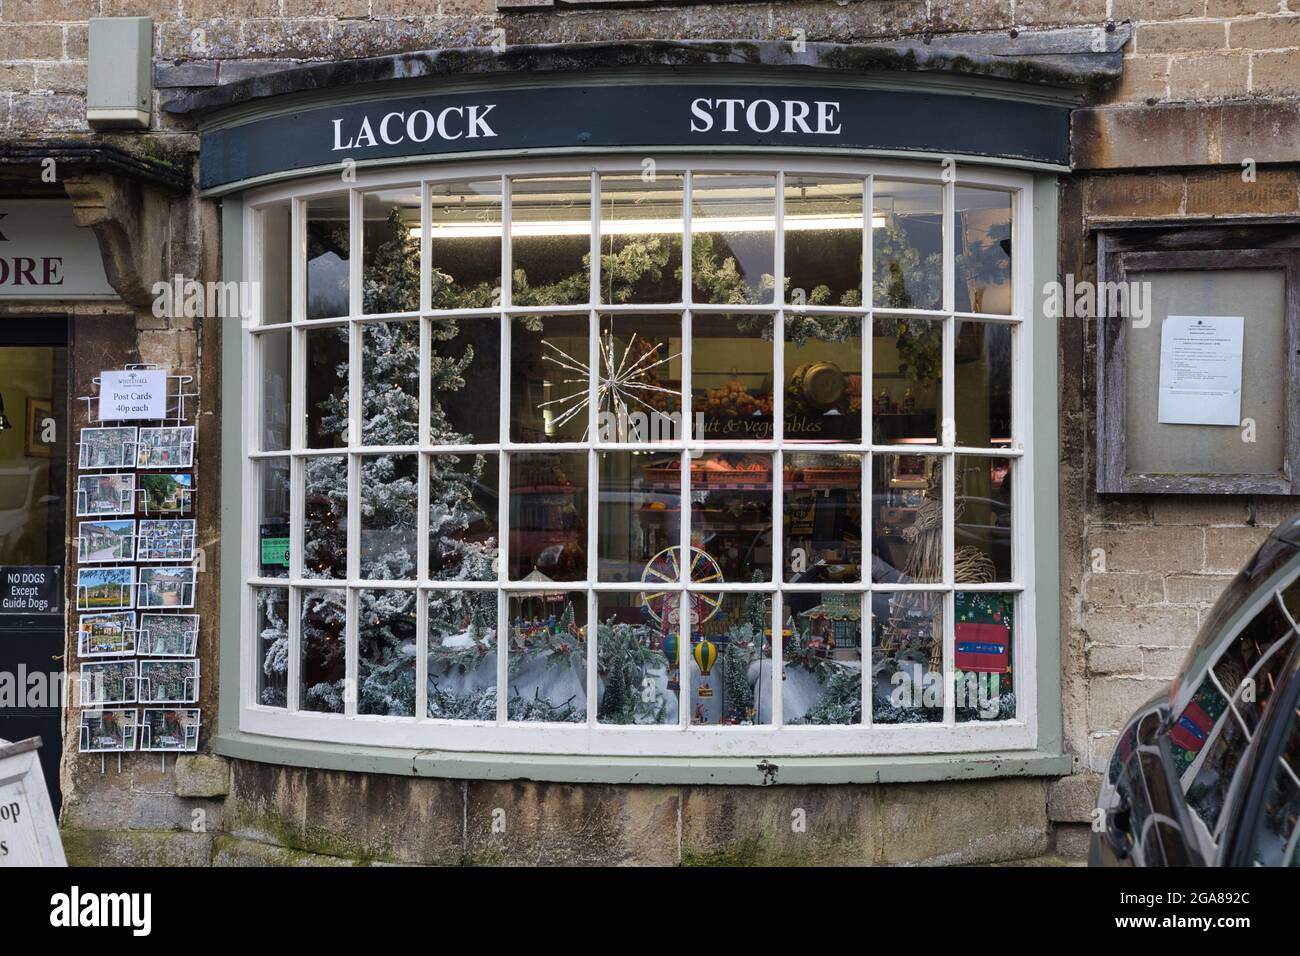 Decorative old fashioned type shop window in the village of Lacock, Wiltshire, England, UK Stock Photo